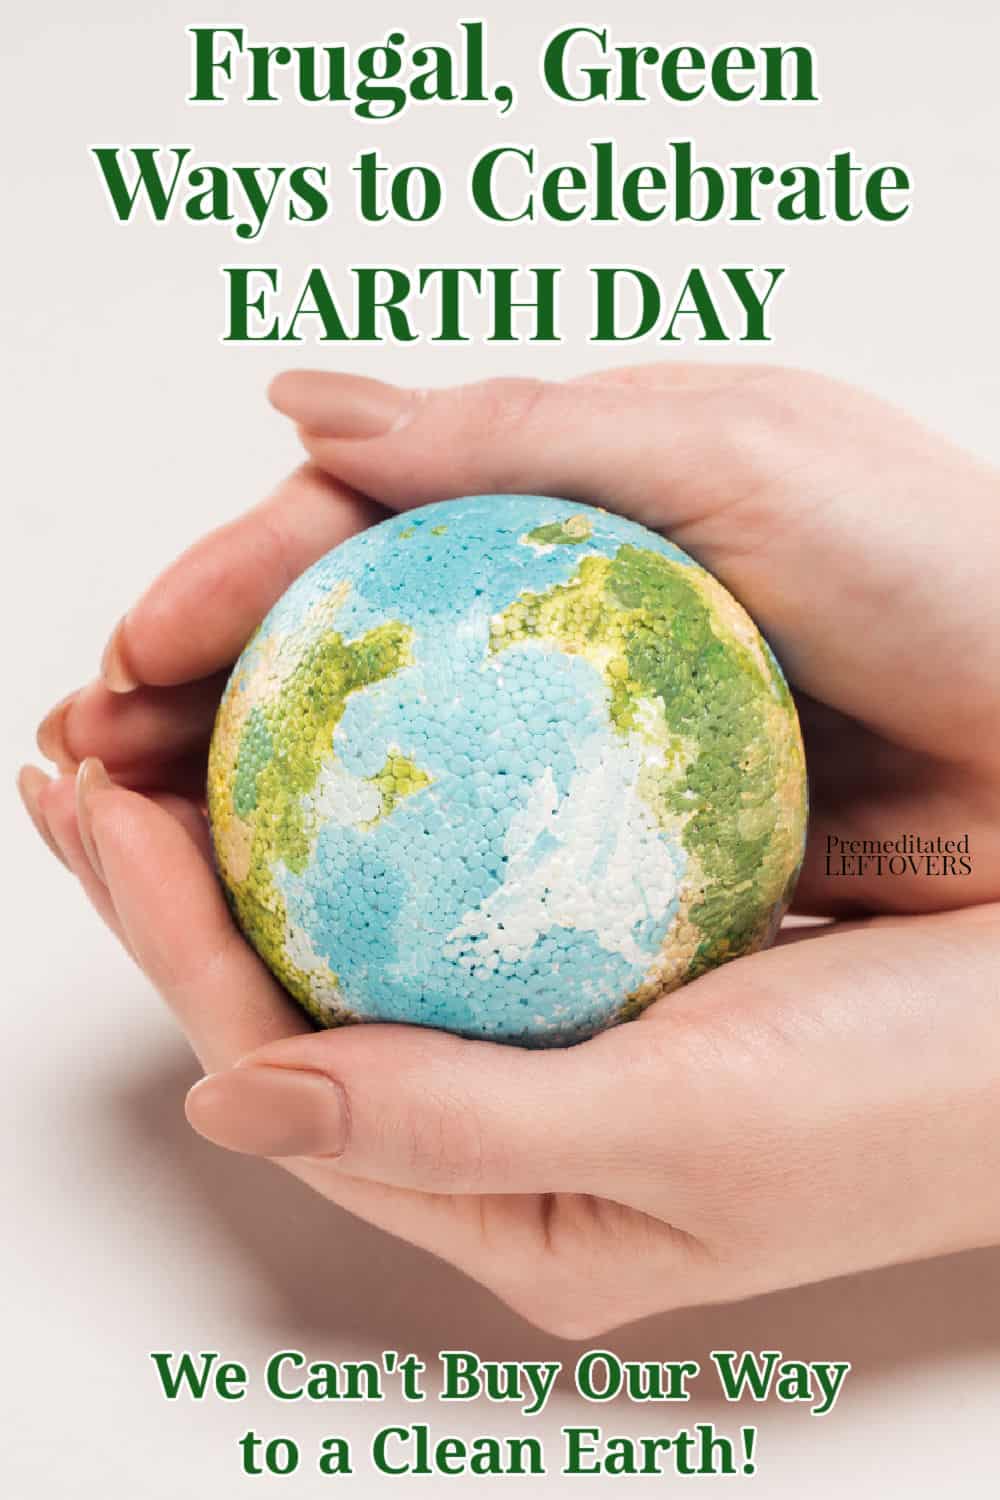 frugal green ways to celebrate the earth without driving